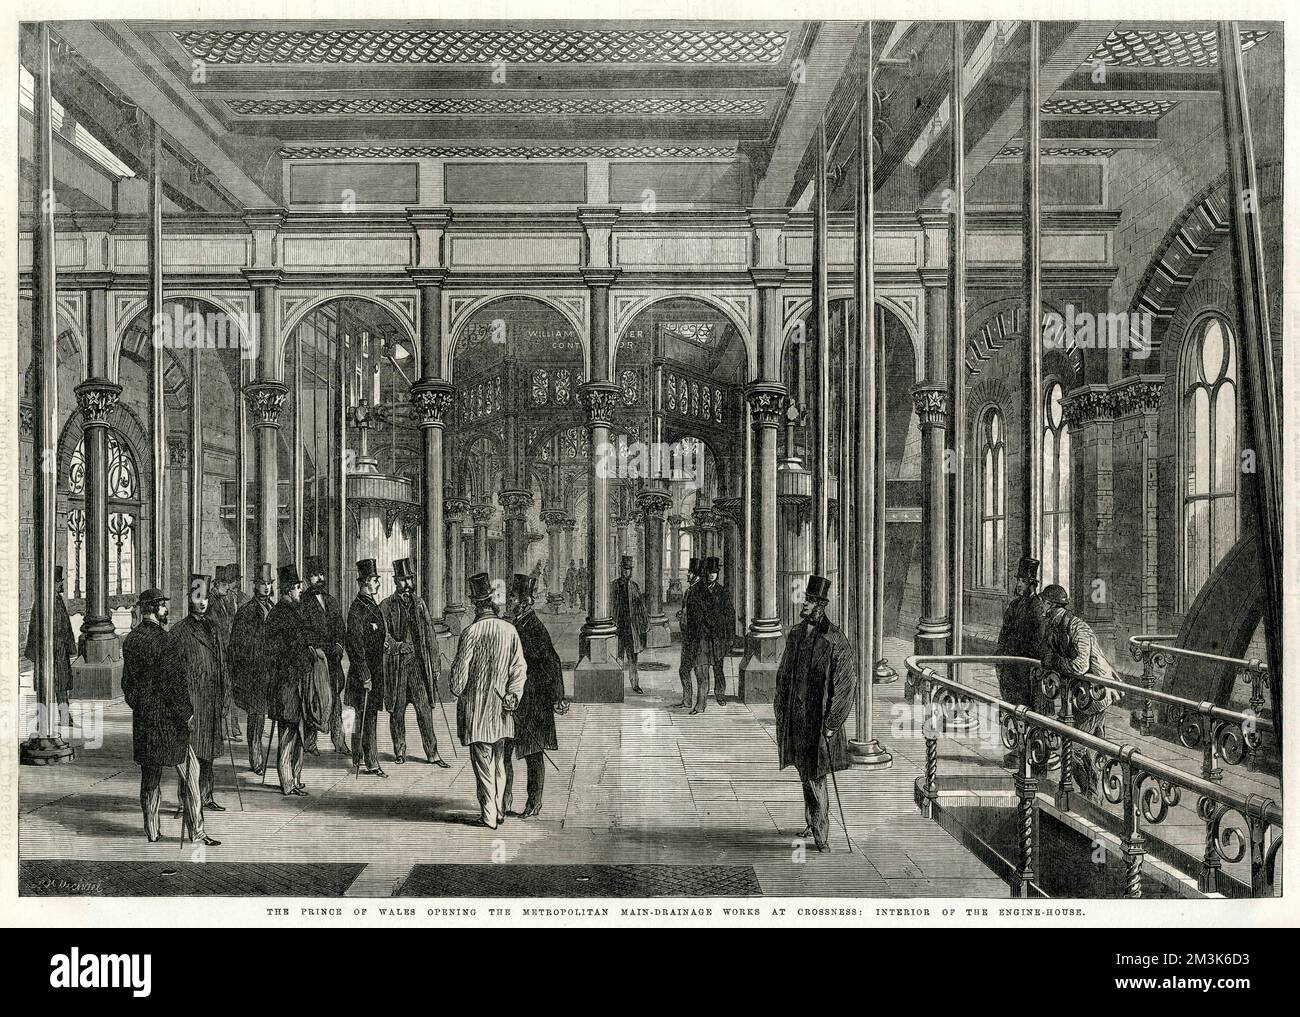 Visit of the Prince of Wales (later King Edward VII) to open the Metropolitan Main Drainage Works at Crossness.   Number of visitors in the engine room of the works, which were built by Sir Joseph Bazalgette as part of an improved drainage and sewage system for London.  The building shown is now better known as the Crossness Pumping Station.     Date: 1865 Stock Photo